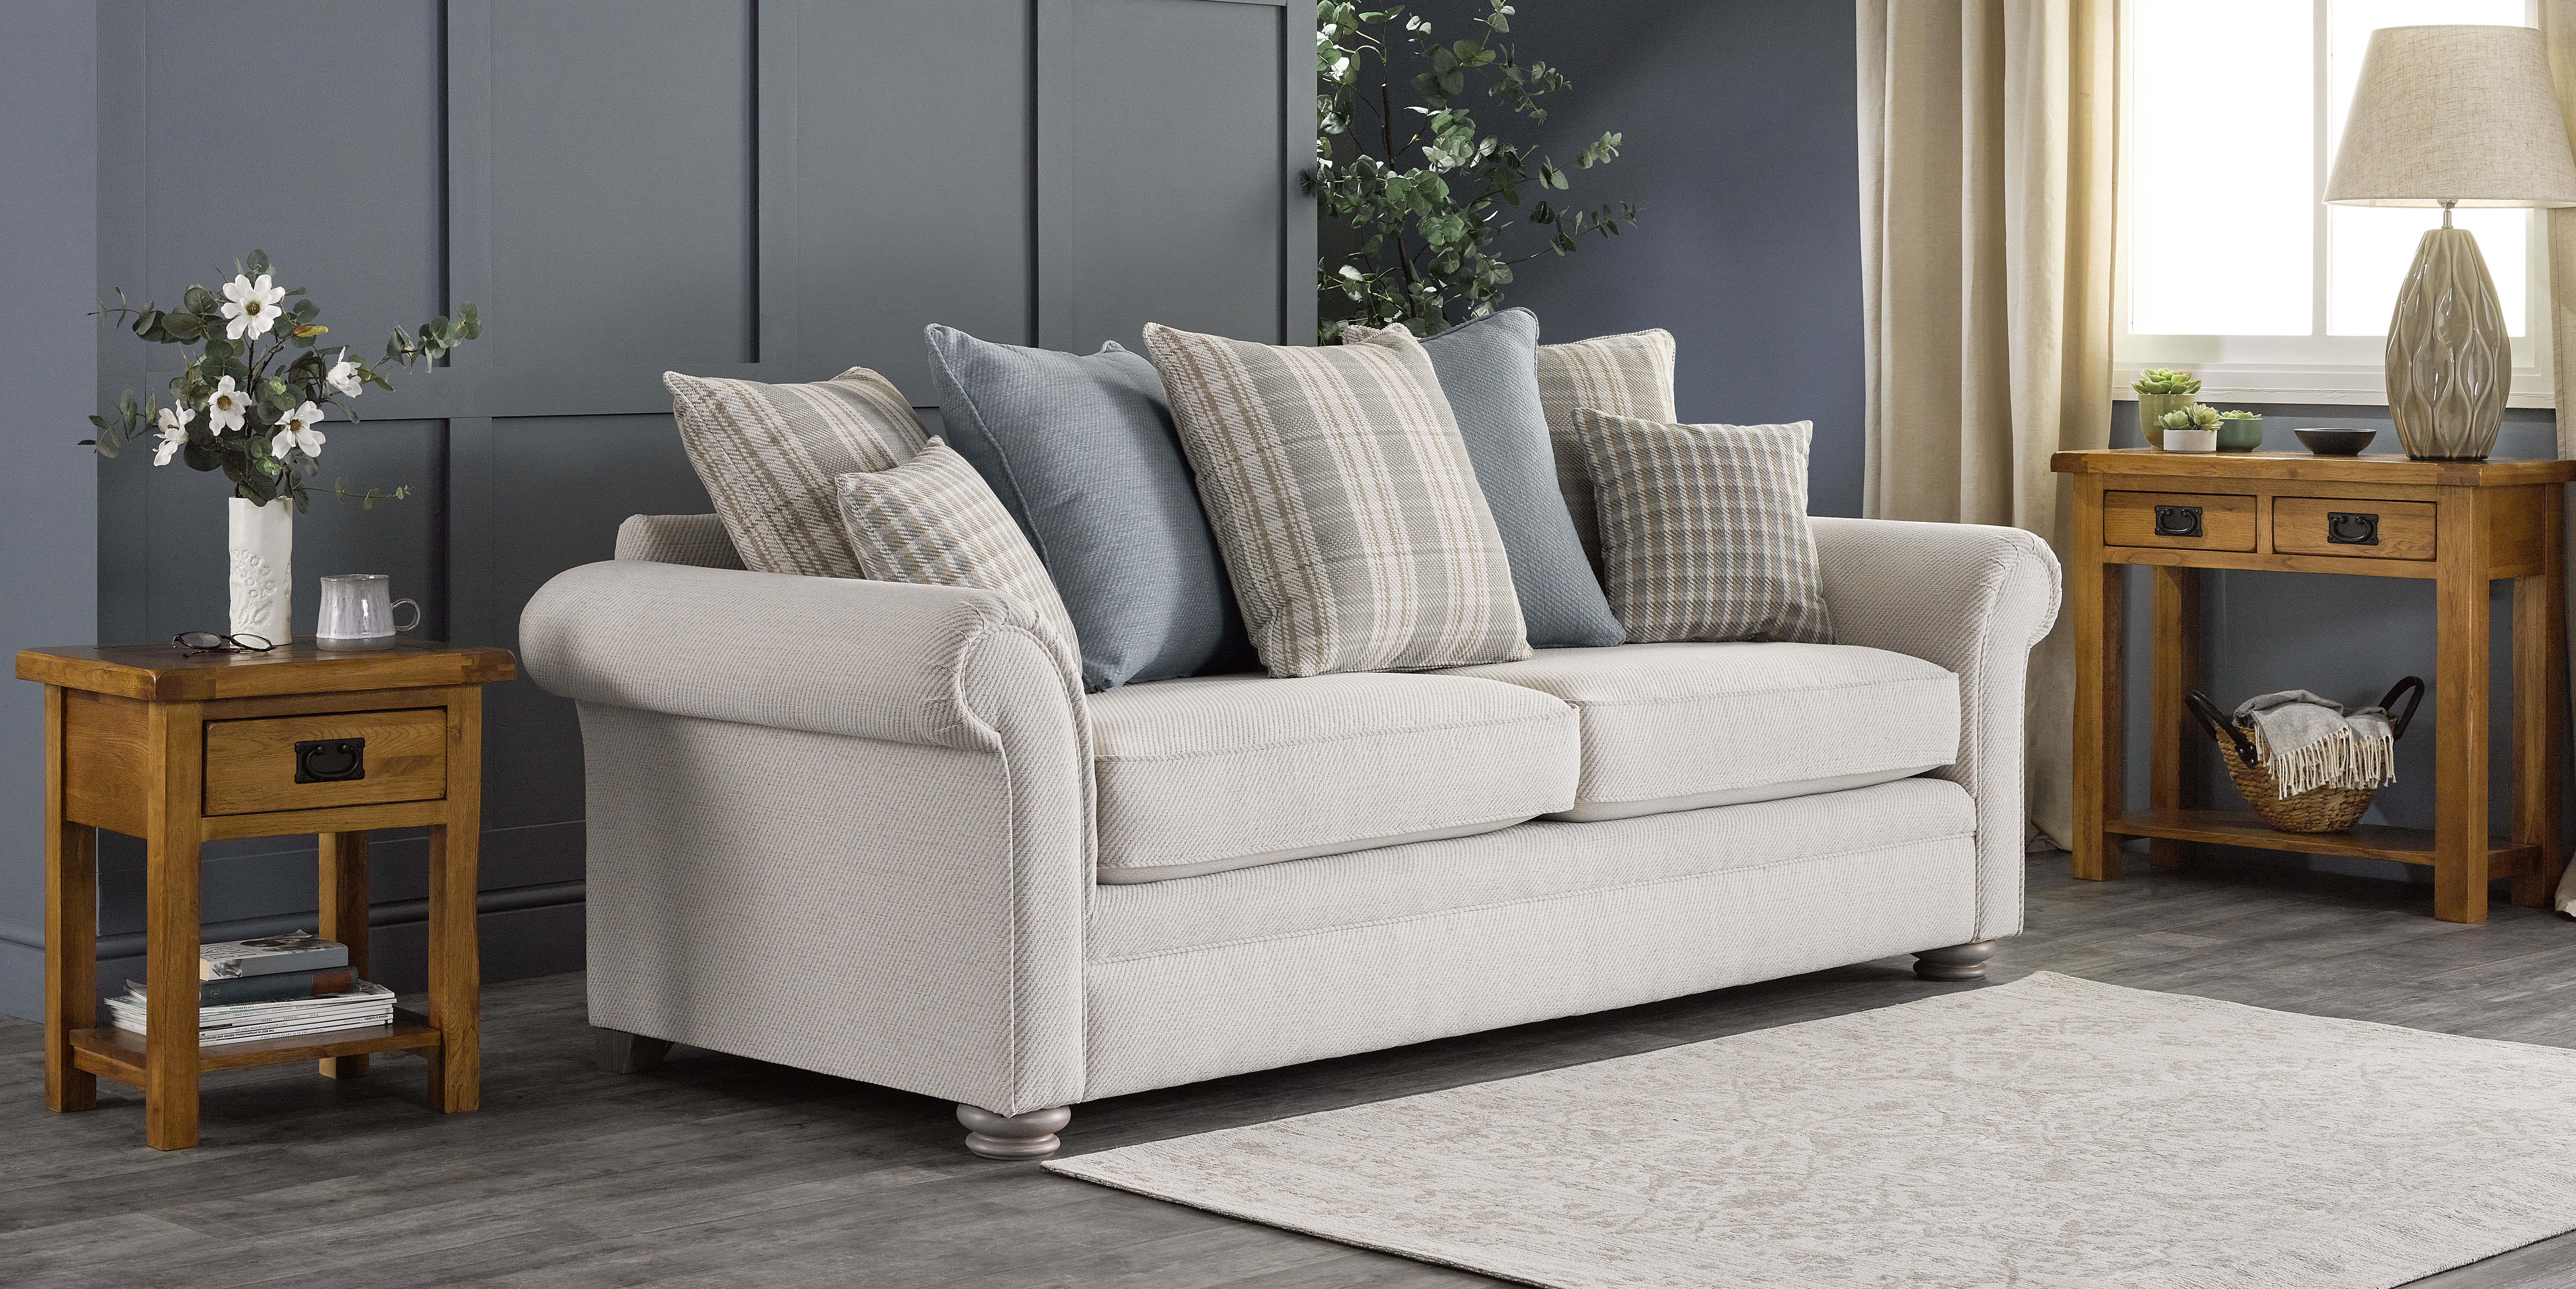 Beige sofa and natural oak furniture in blue and grey living room